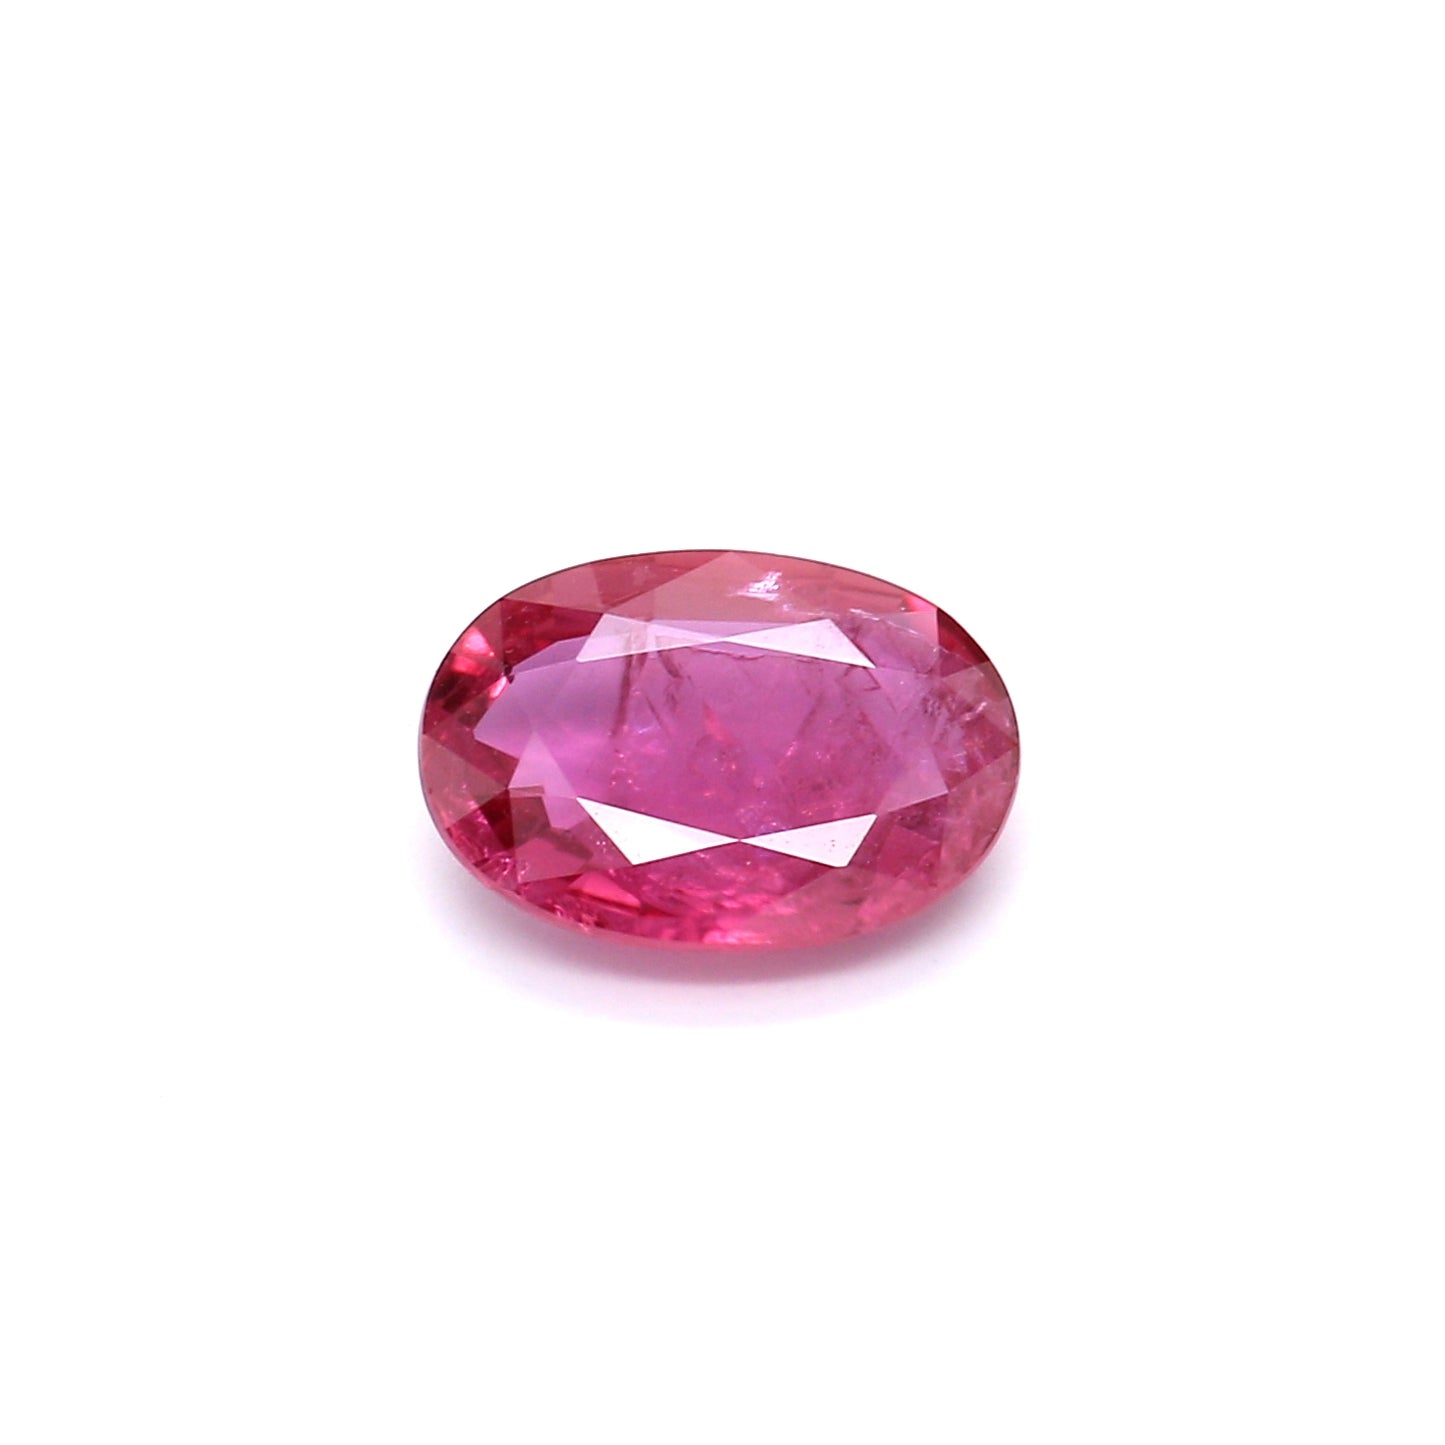 0.69ct Pinkish Red, Oval Ruby, H(a), Thailand - 6.98 x 4.98 x 2.06mm